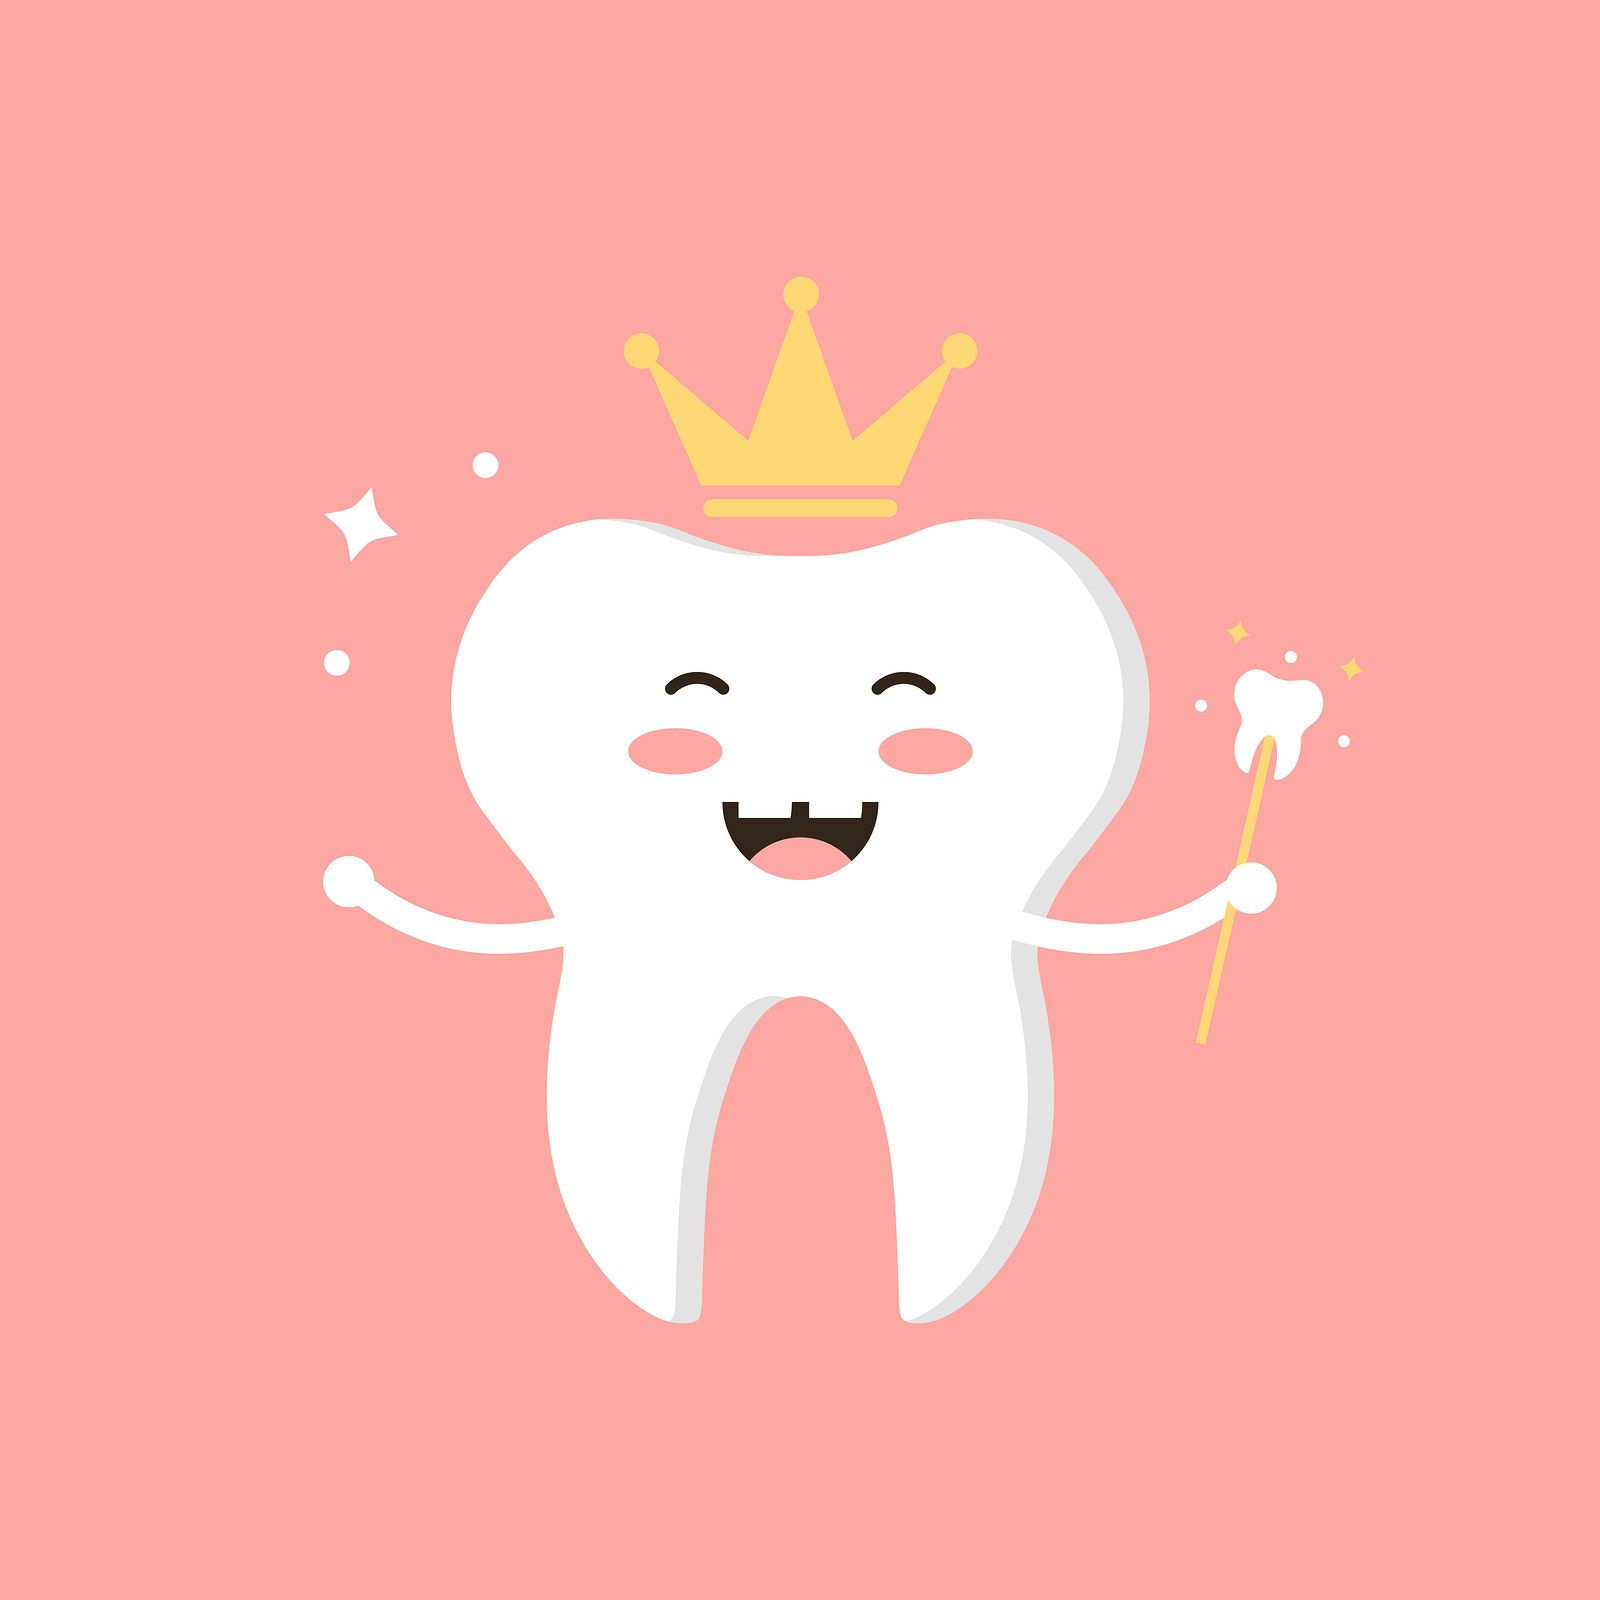 A cartoon tooth wearing a crown and holding a magic wand - Dentist